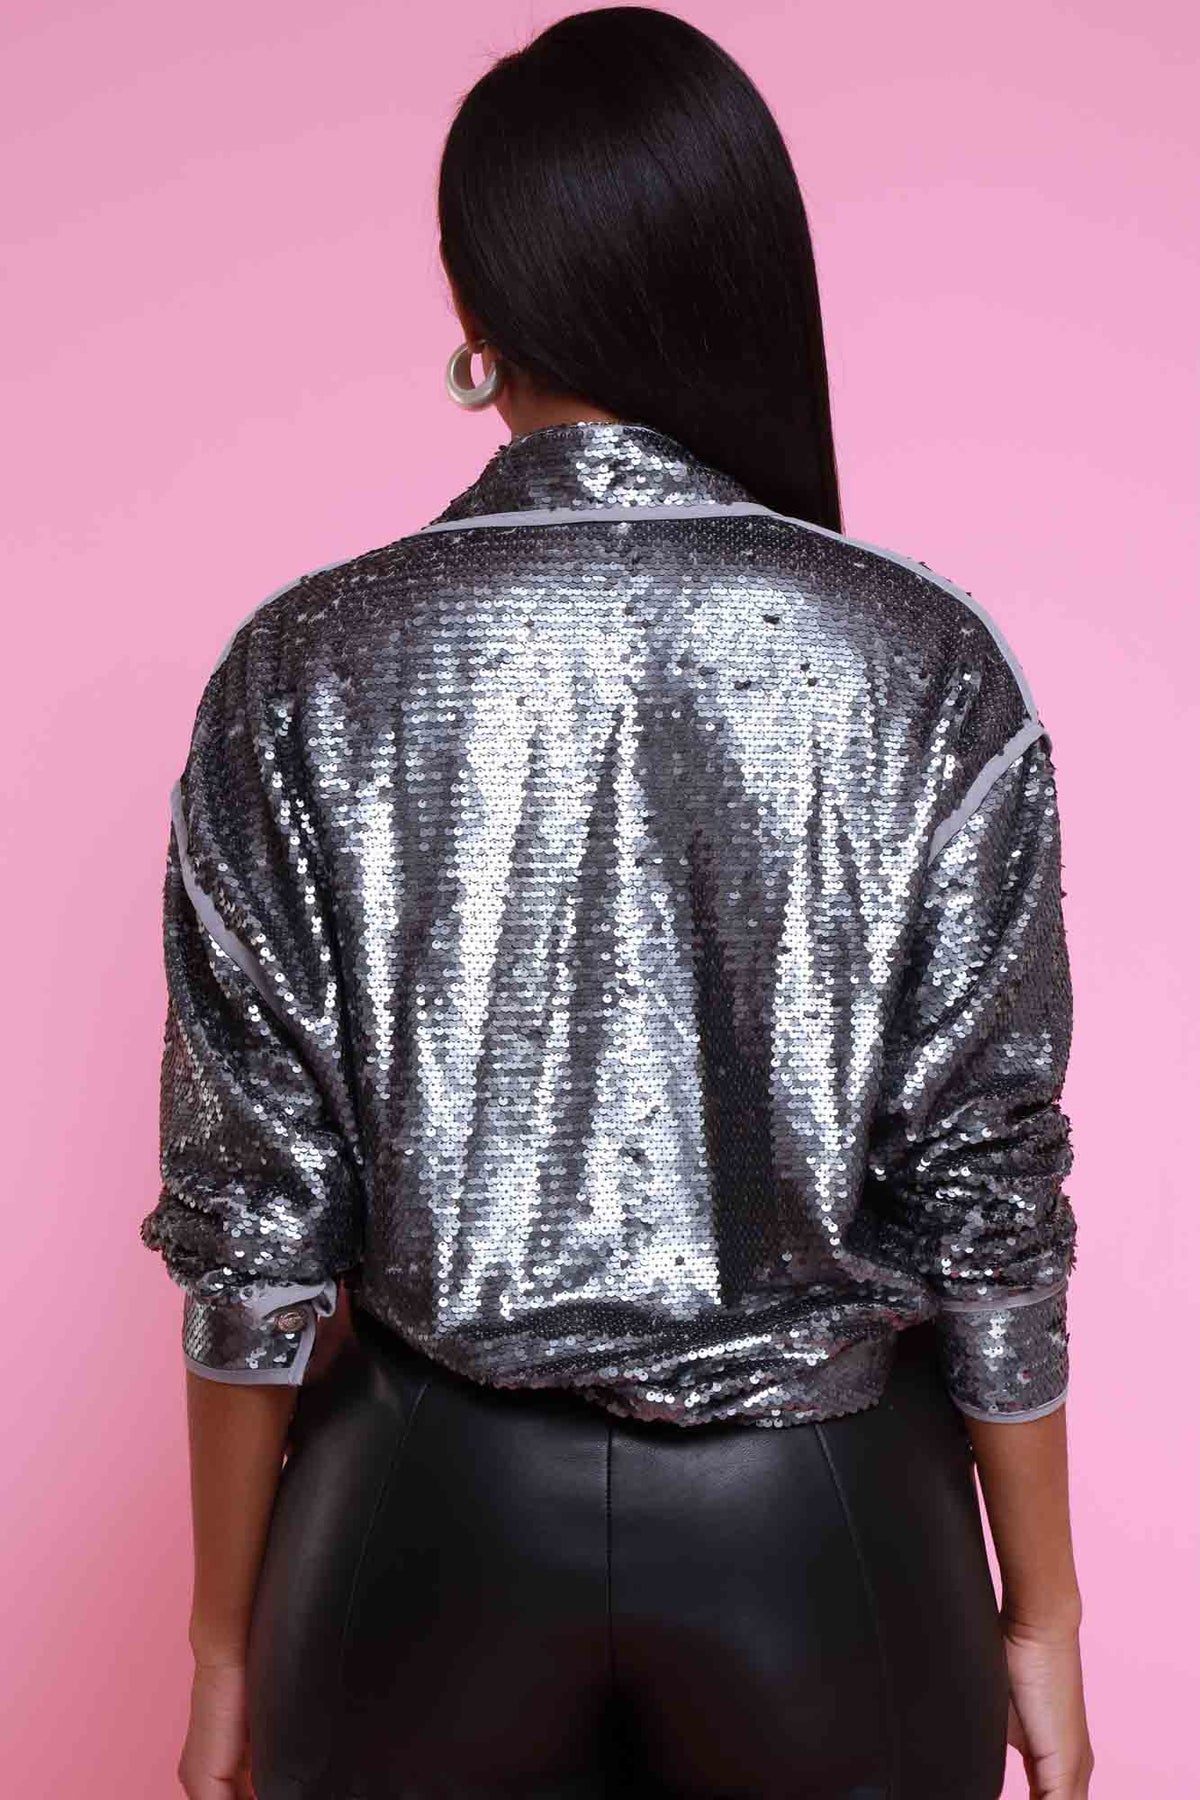 
              Feel The Spark Oversized Sequin Button Up - Gunmetal Gray - Swank A Posh
            